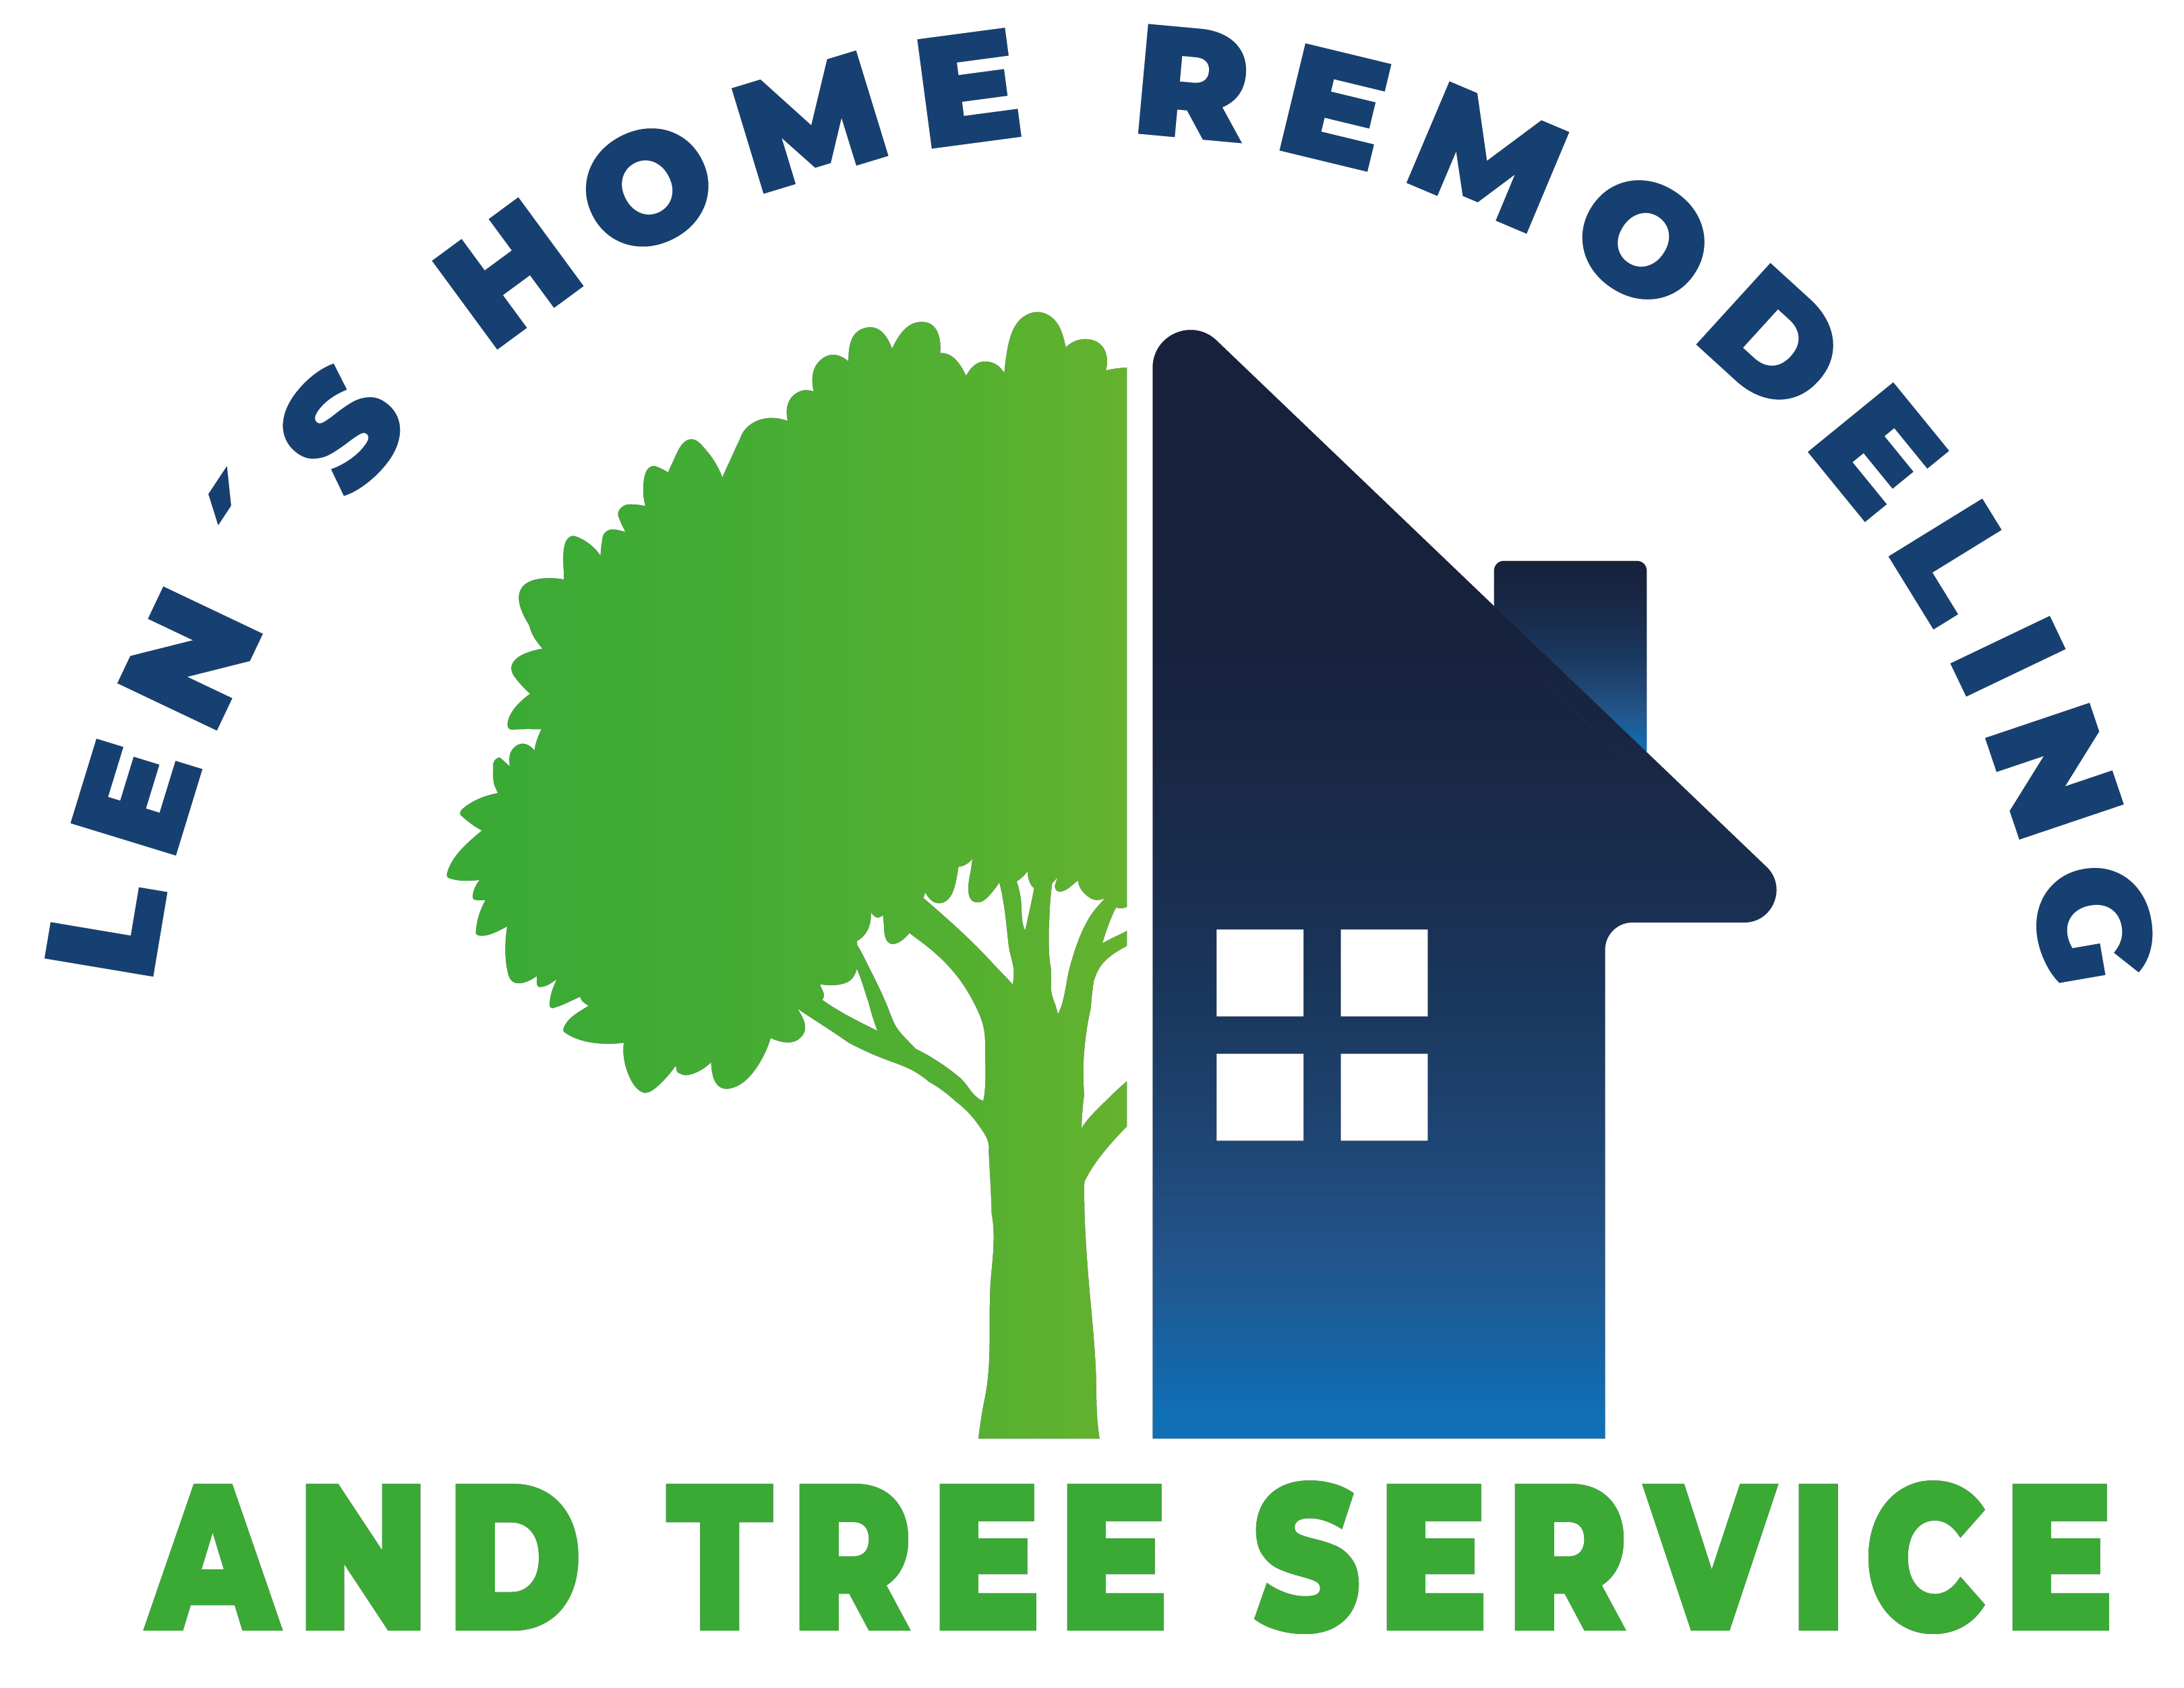 Len's Home Remodeling and Tree Service, LLC Logo